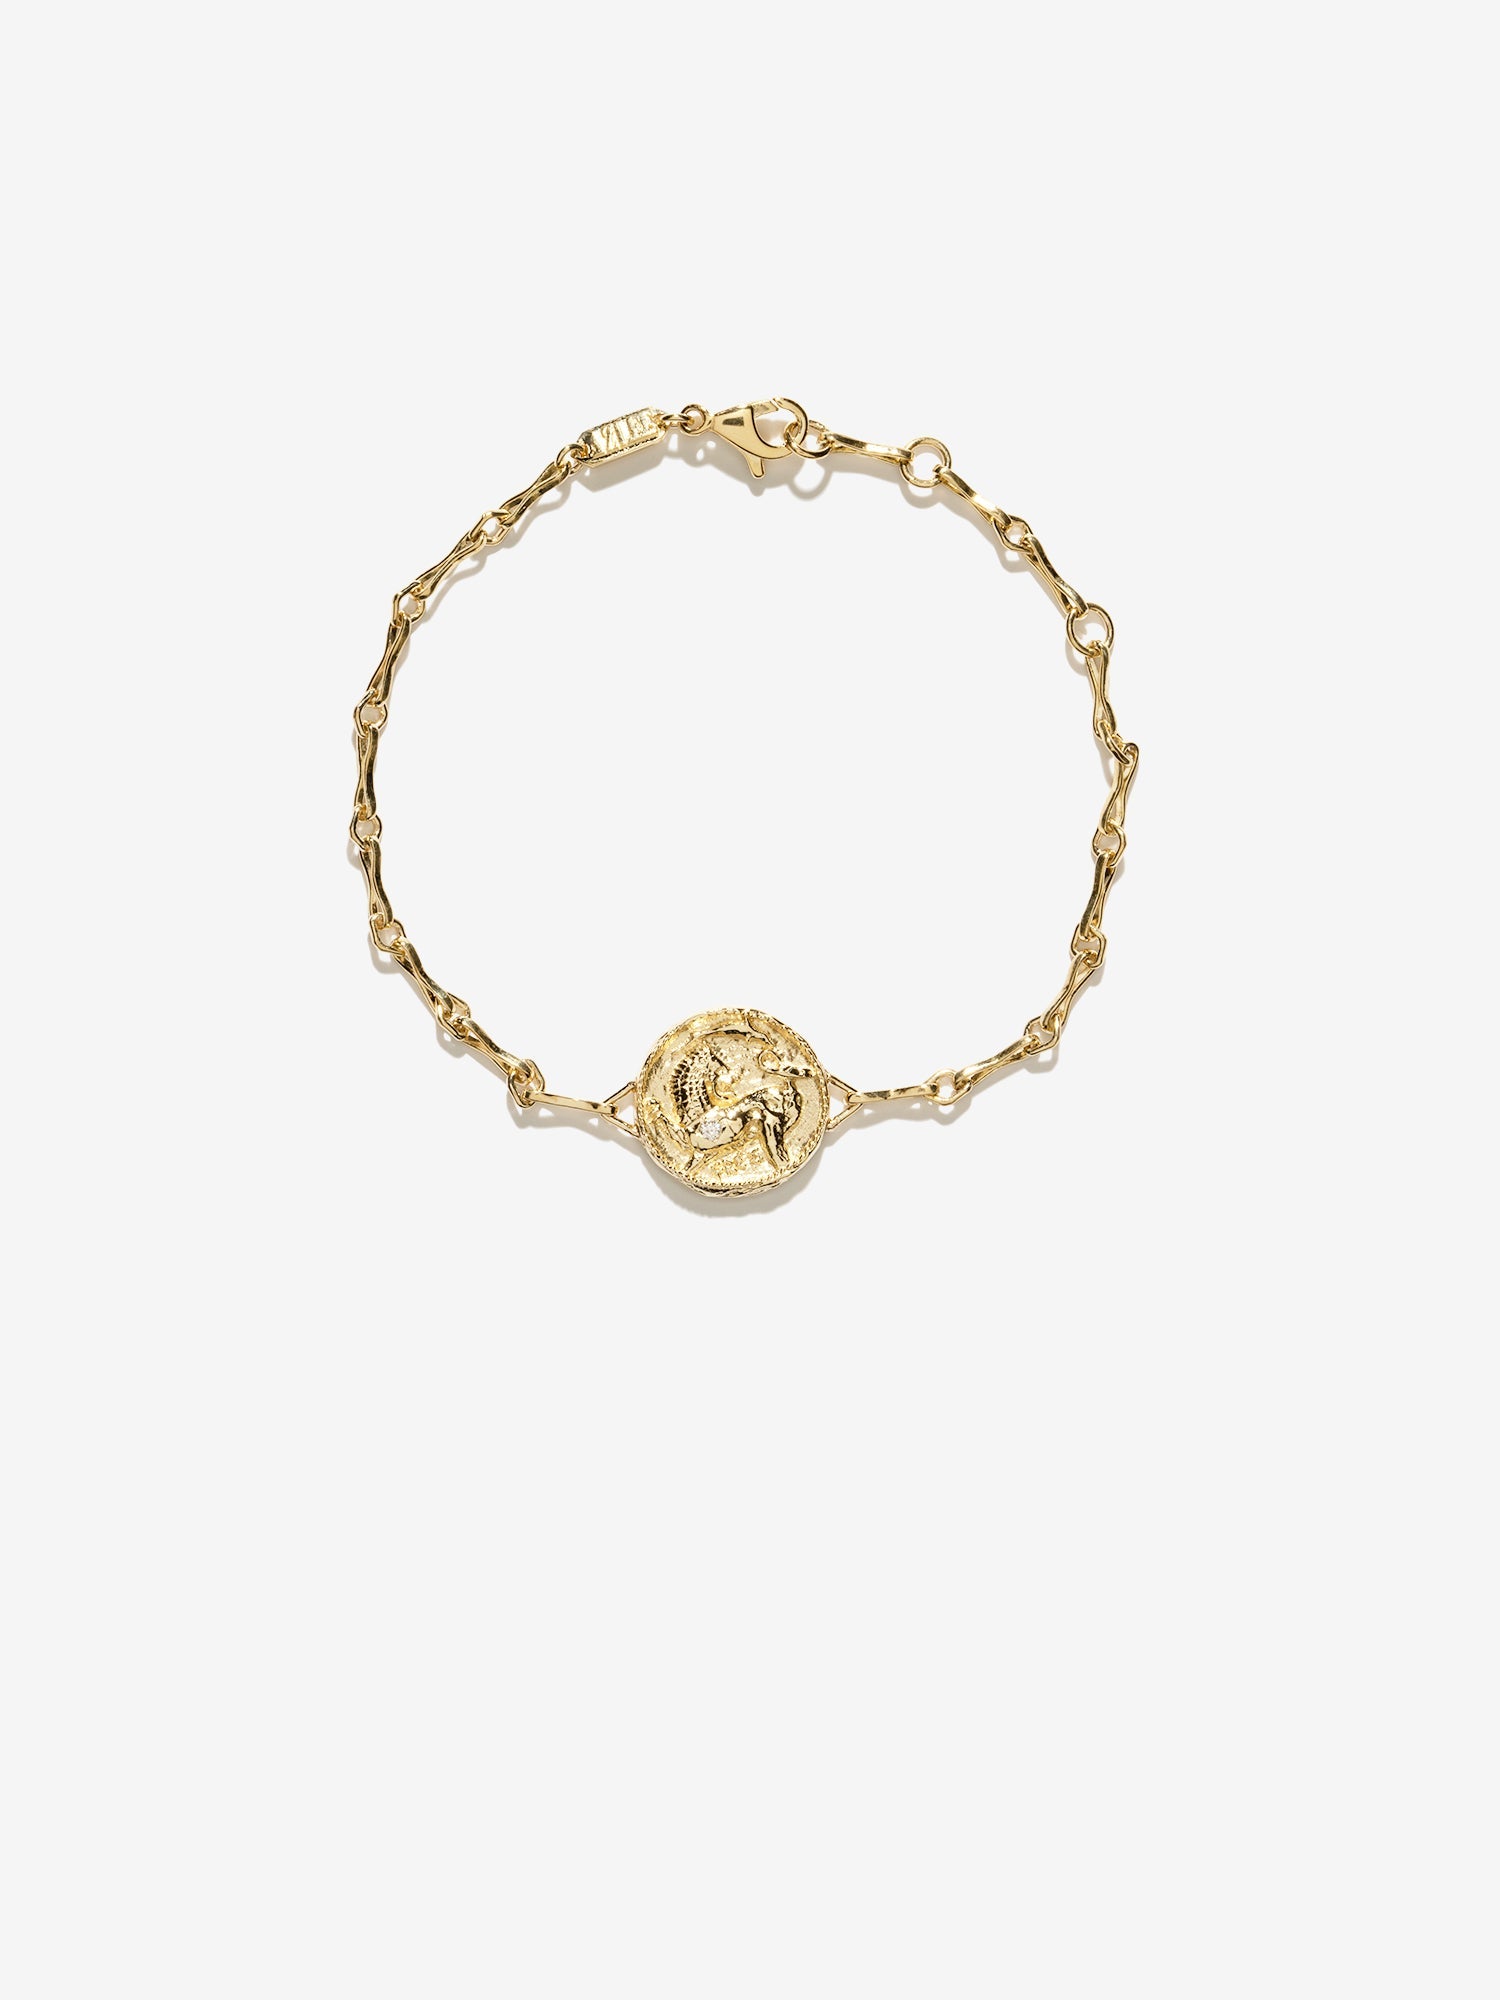 Lion and Dolphin Coin Bracelet